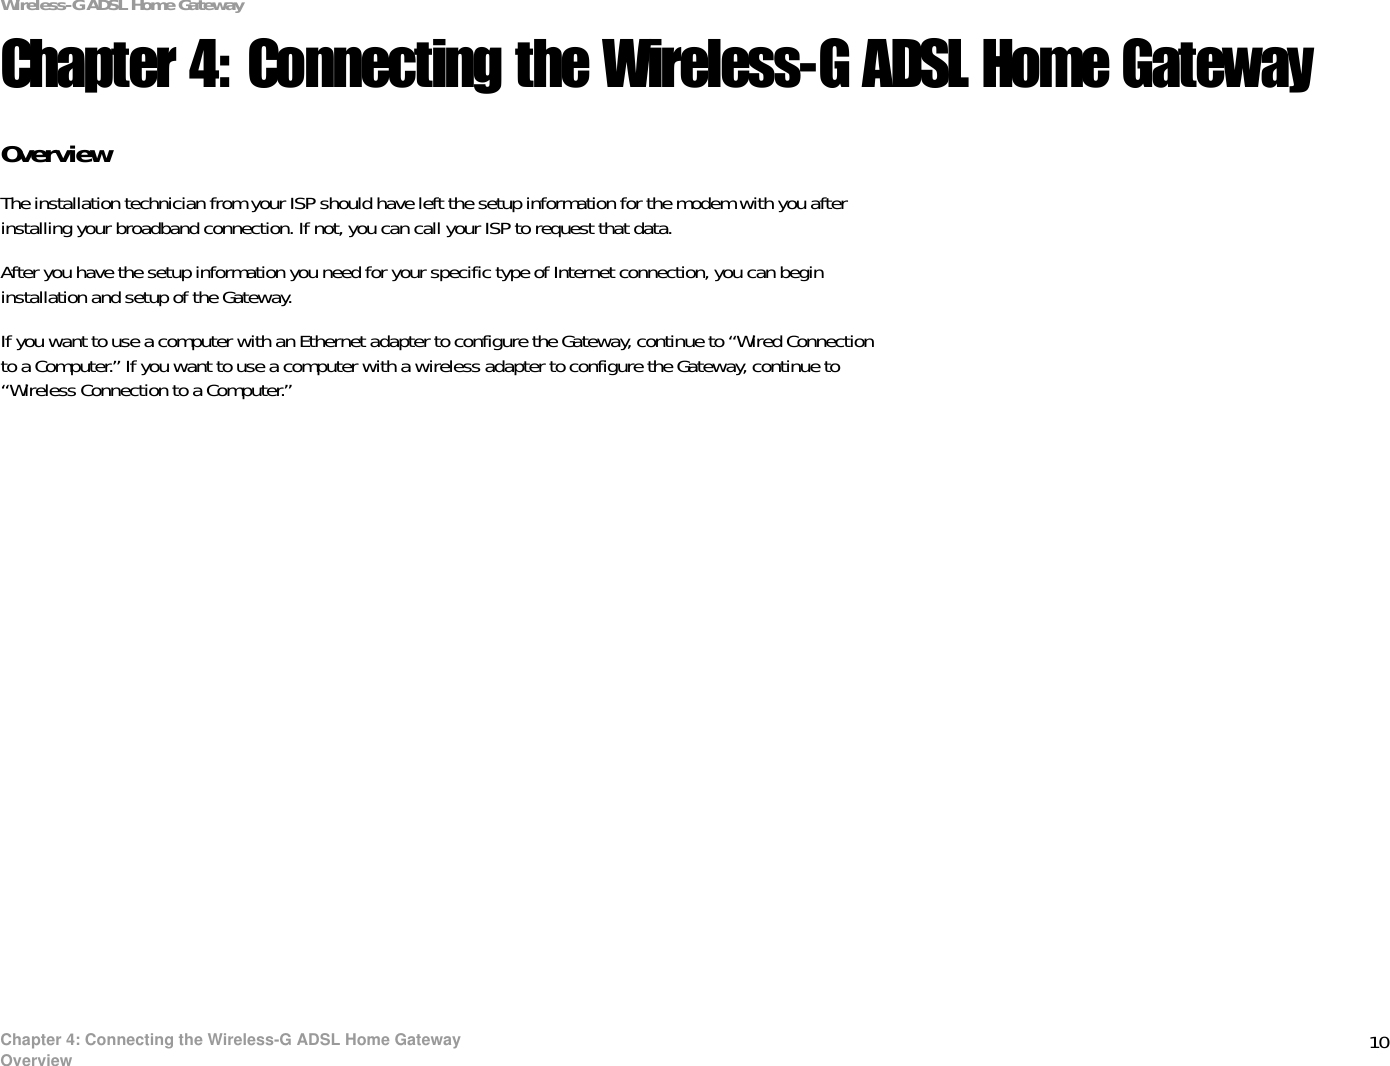 10Chapter 4: Connecting the Wireless-G ADSL Home GatewayOverviewWireless-G ADSL Home GatewayChapter 4: Connecting the Wireless-G ADSL Home GatewayOverviewThe installation technician from your ISP should have left the setup information for the modem with you after installing your broadband connection. If not, you can call your ISP to request that data. After you have the setup information you need for your specific type of Internet connection, you can begin installation and setup of the Gateway.If you want to use a computer with an Ethernet adapter to configure the Gateway, continue to “Wired Connection to a Computer.” If you want to use a computer with a wireless adapter to configure the Gateway, continue to “Wireless Connection to a Computer.”